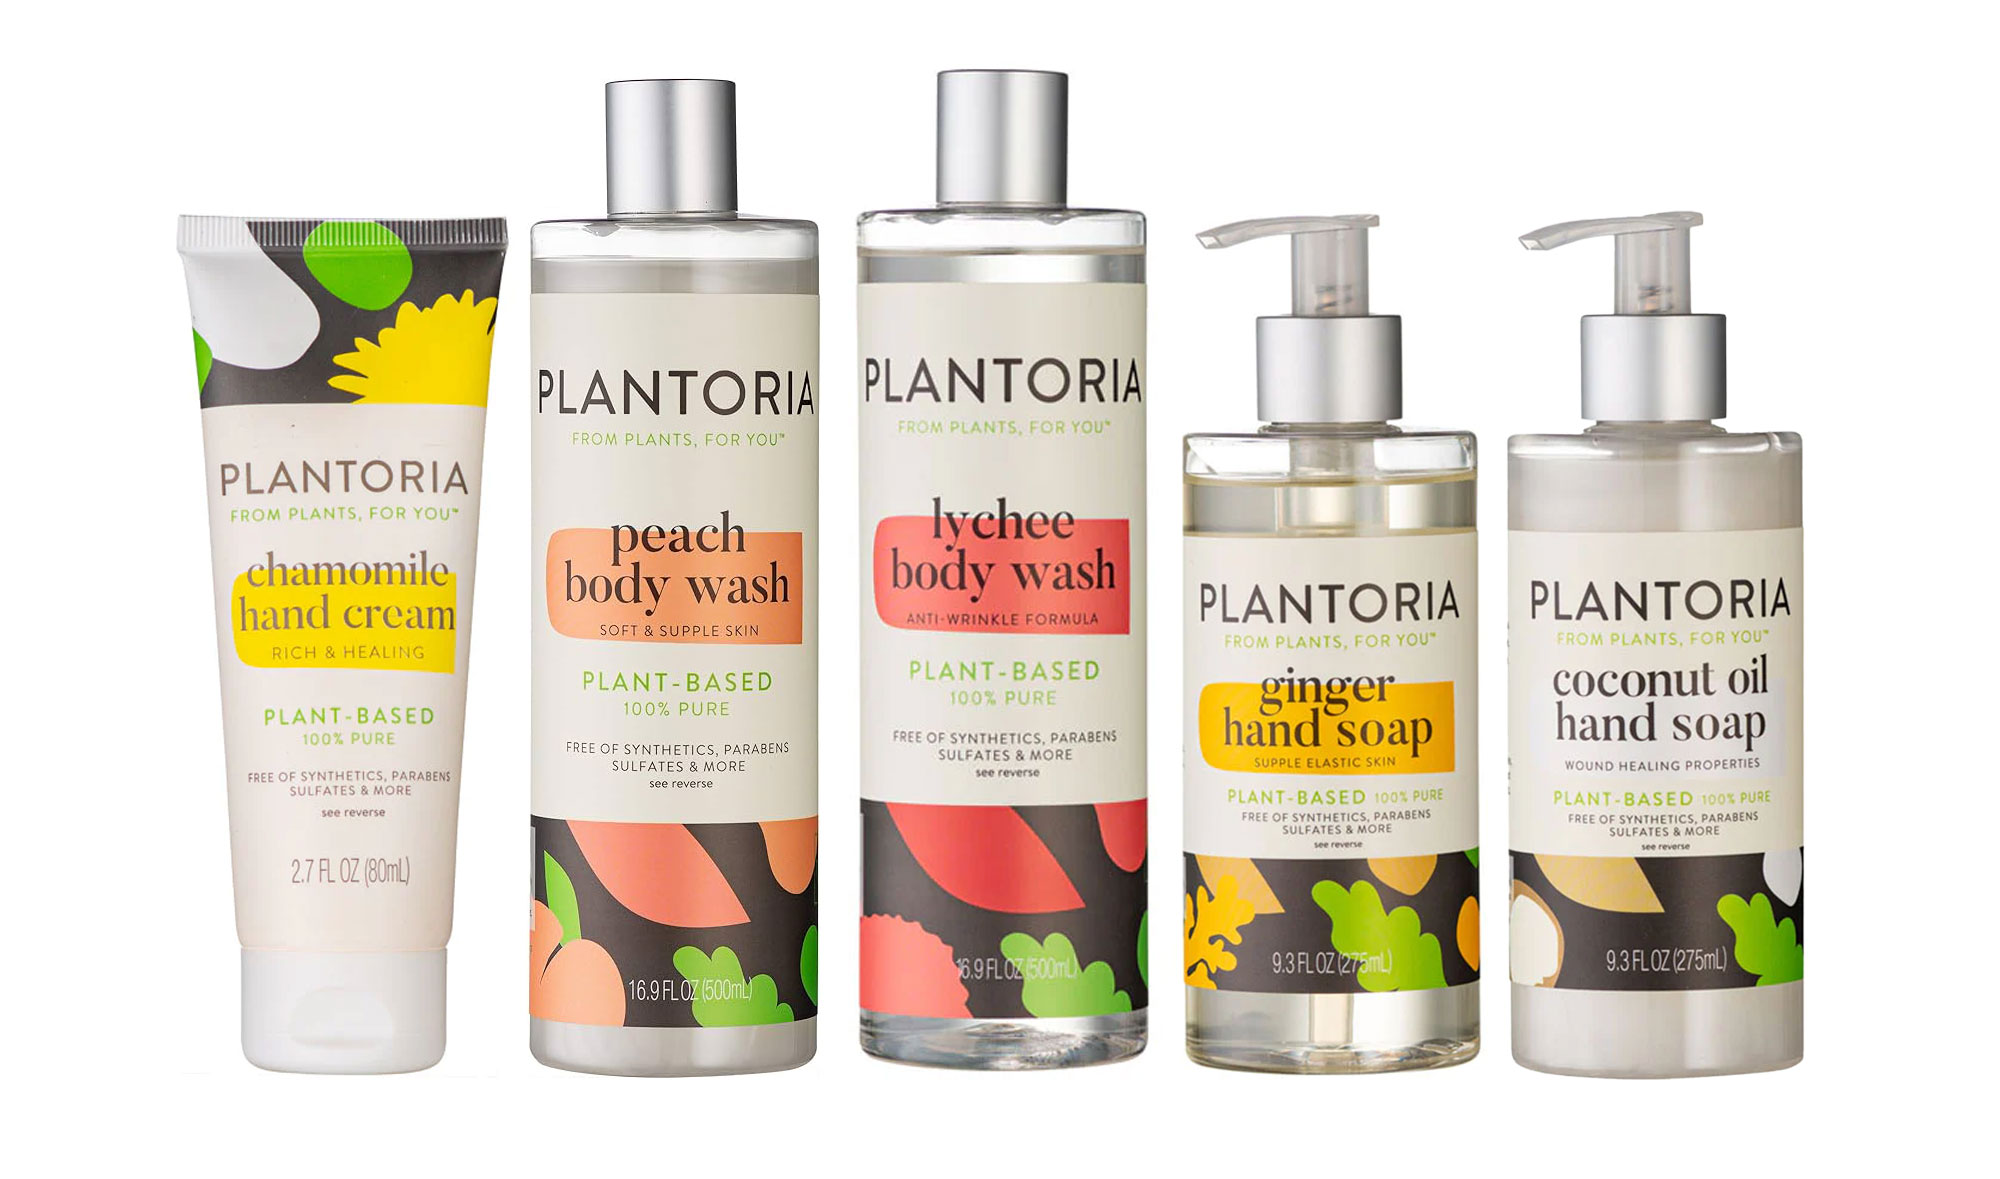 Plantoria Identity and Packaging Design